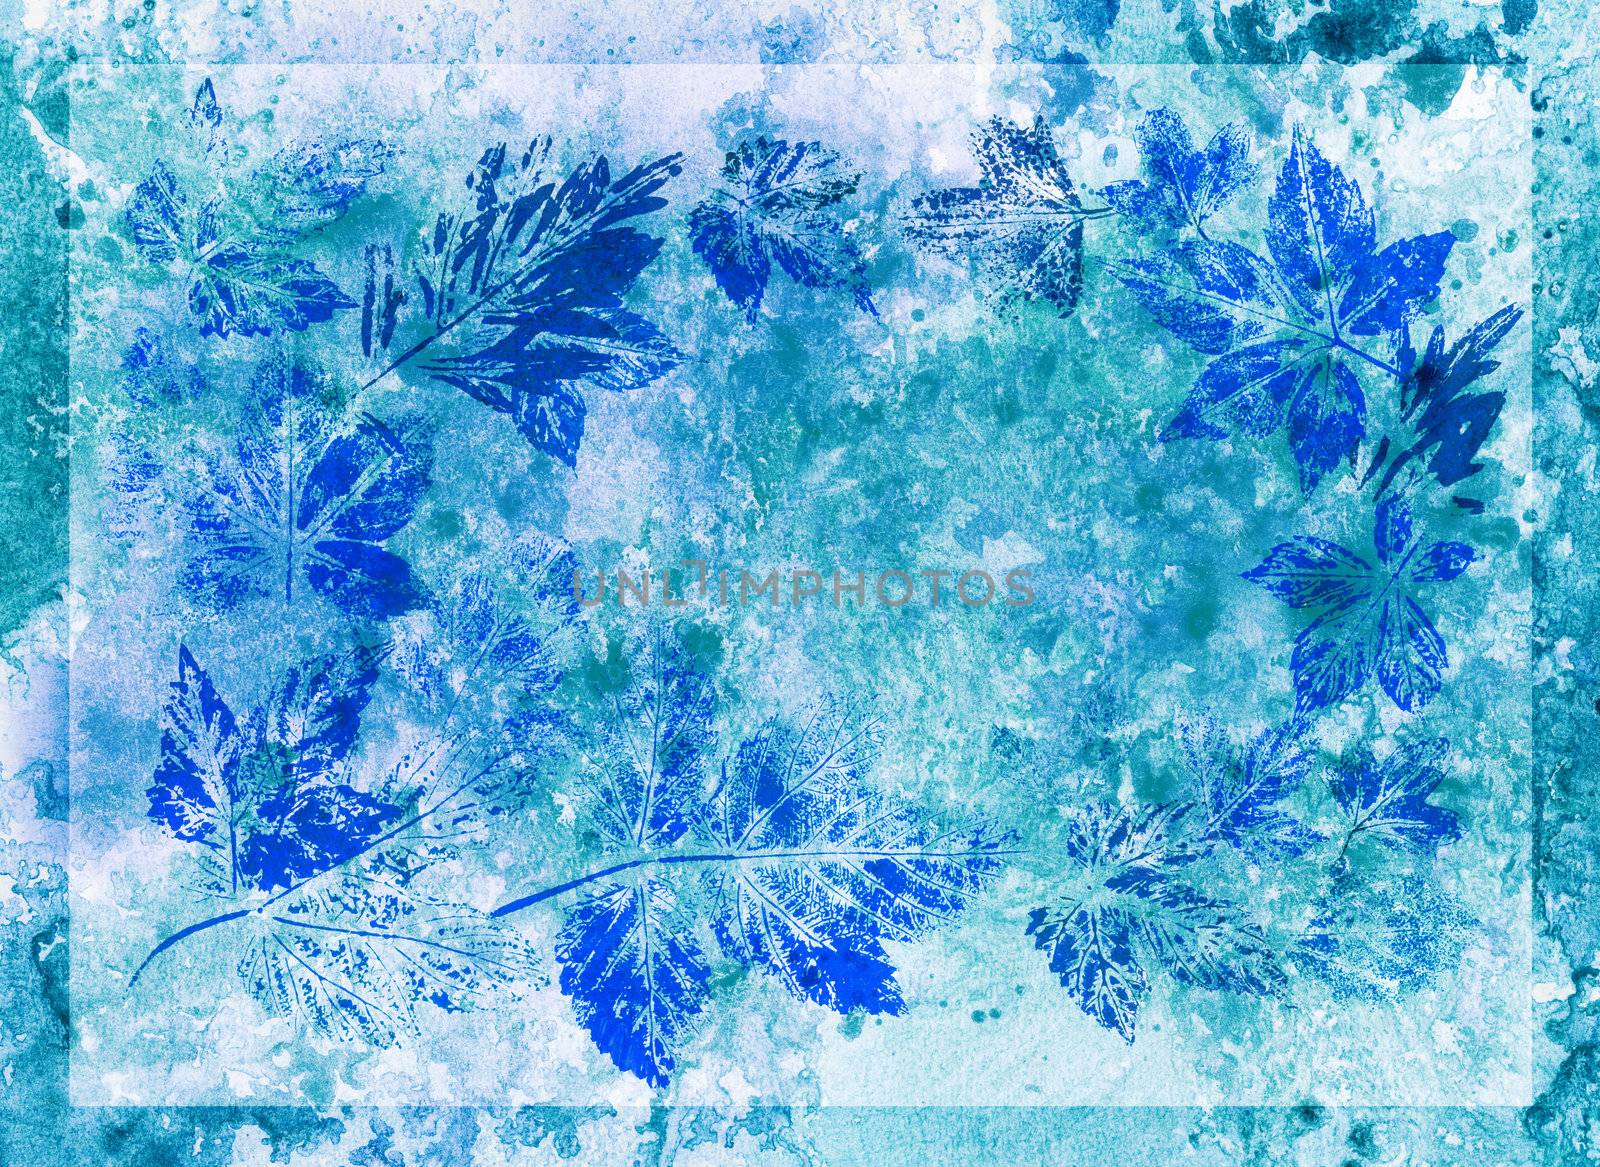 Abstract background, watercolor: leaves, painted on a paper. Blue, violet, green